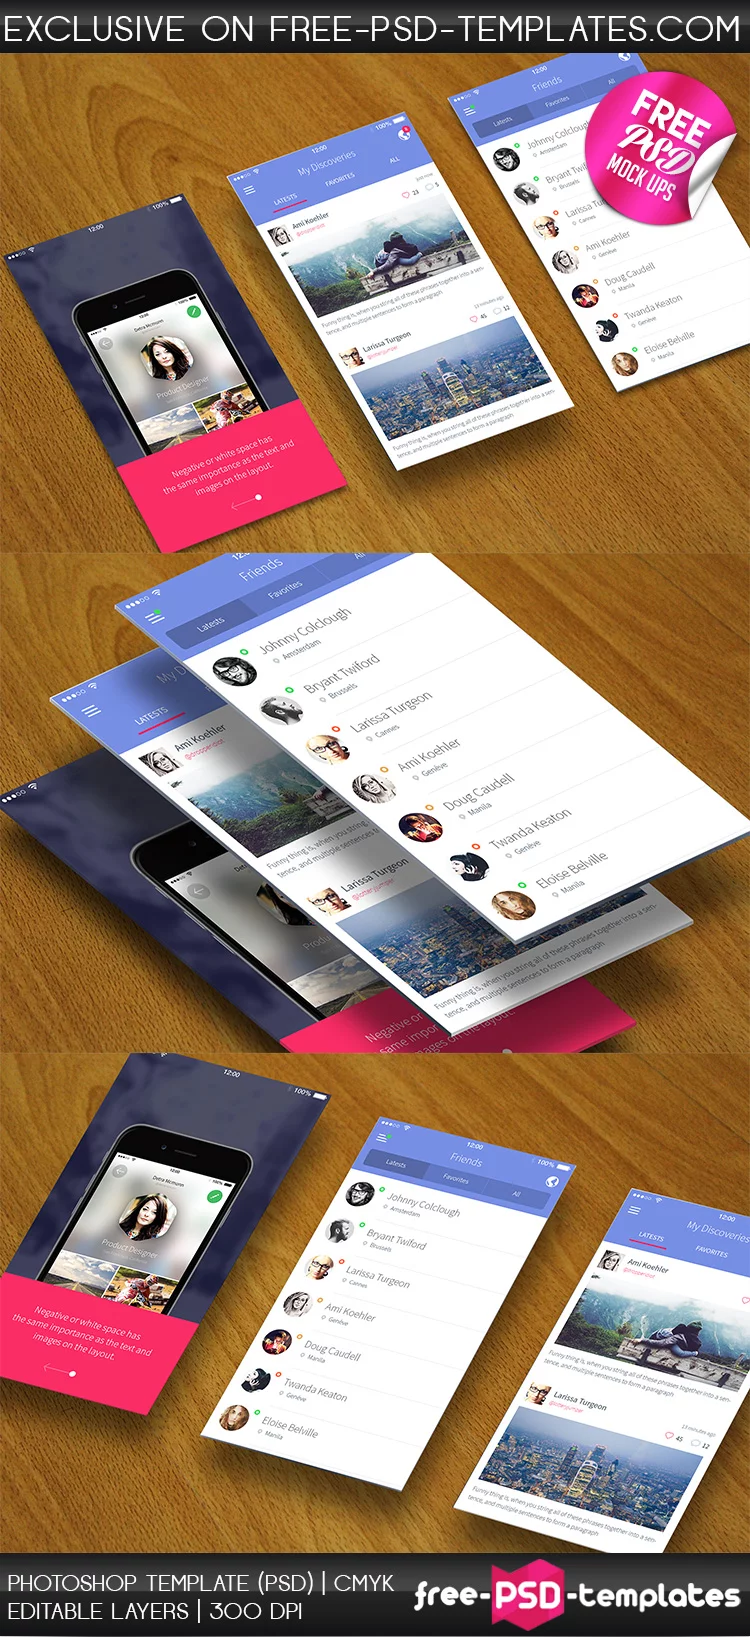 Preview_Free_PSD_Mobile_Apps_mockup